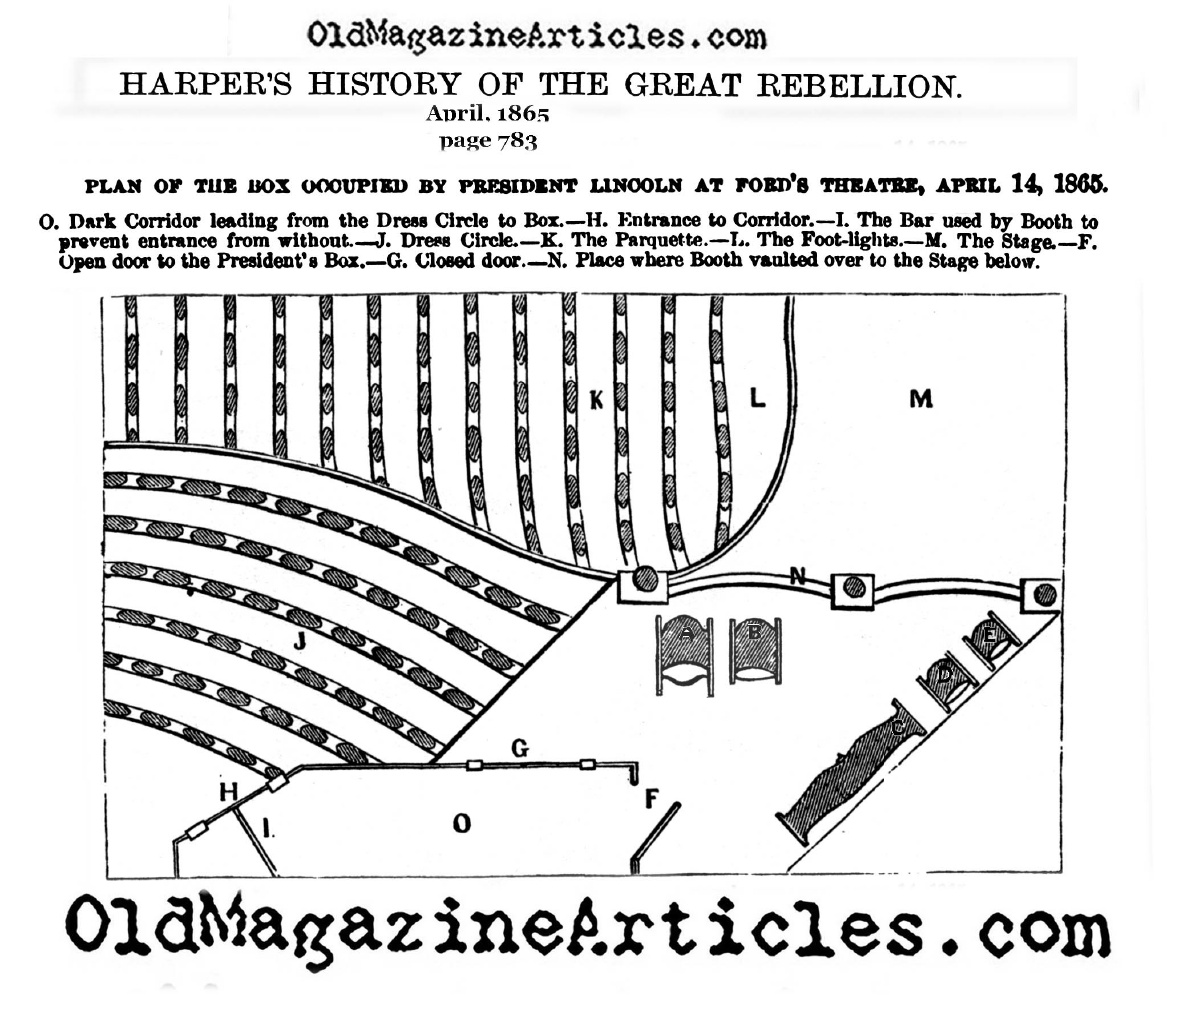 Ford's Theater Layout (Harper's Magazine, 1865)